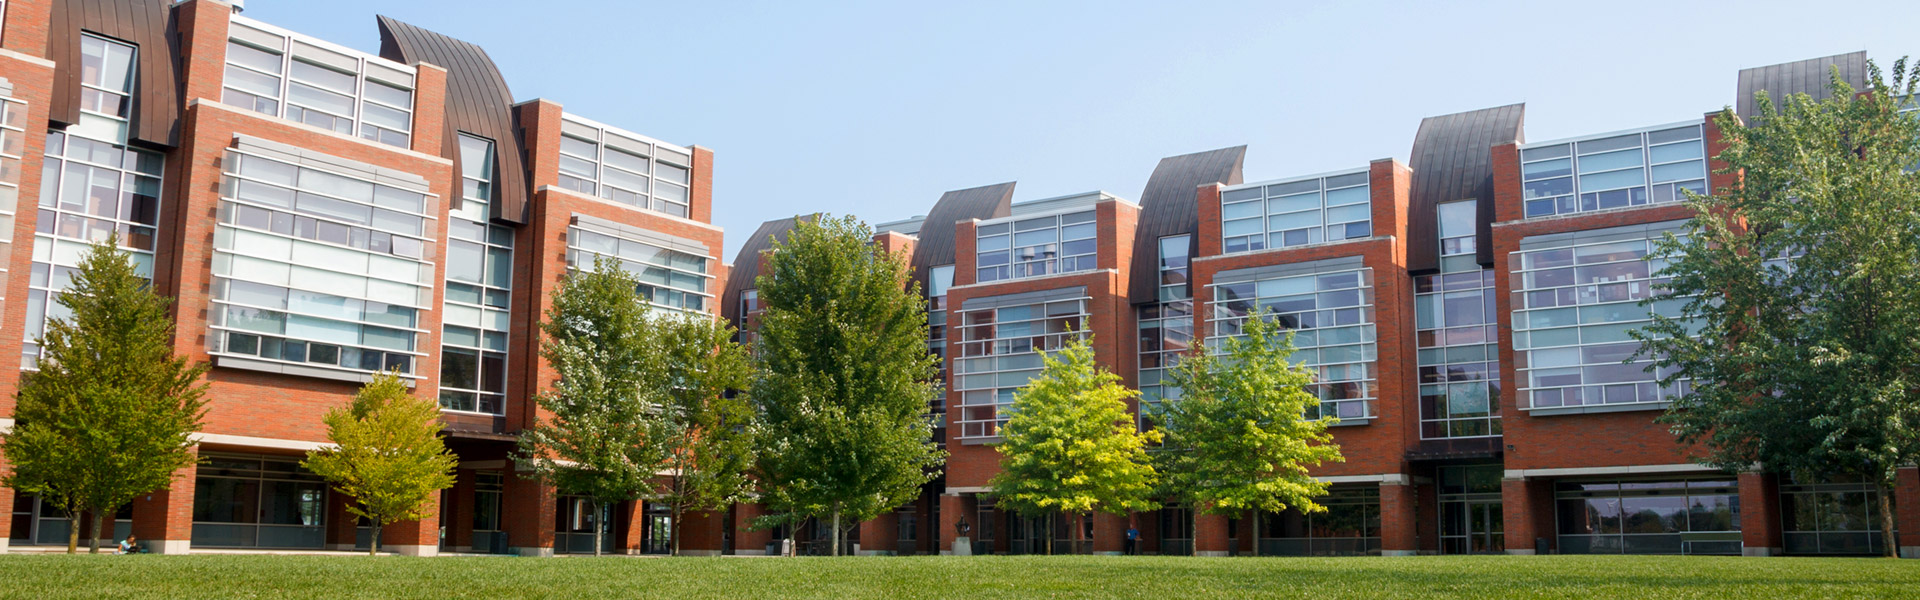 A picture of Polonsky Commons